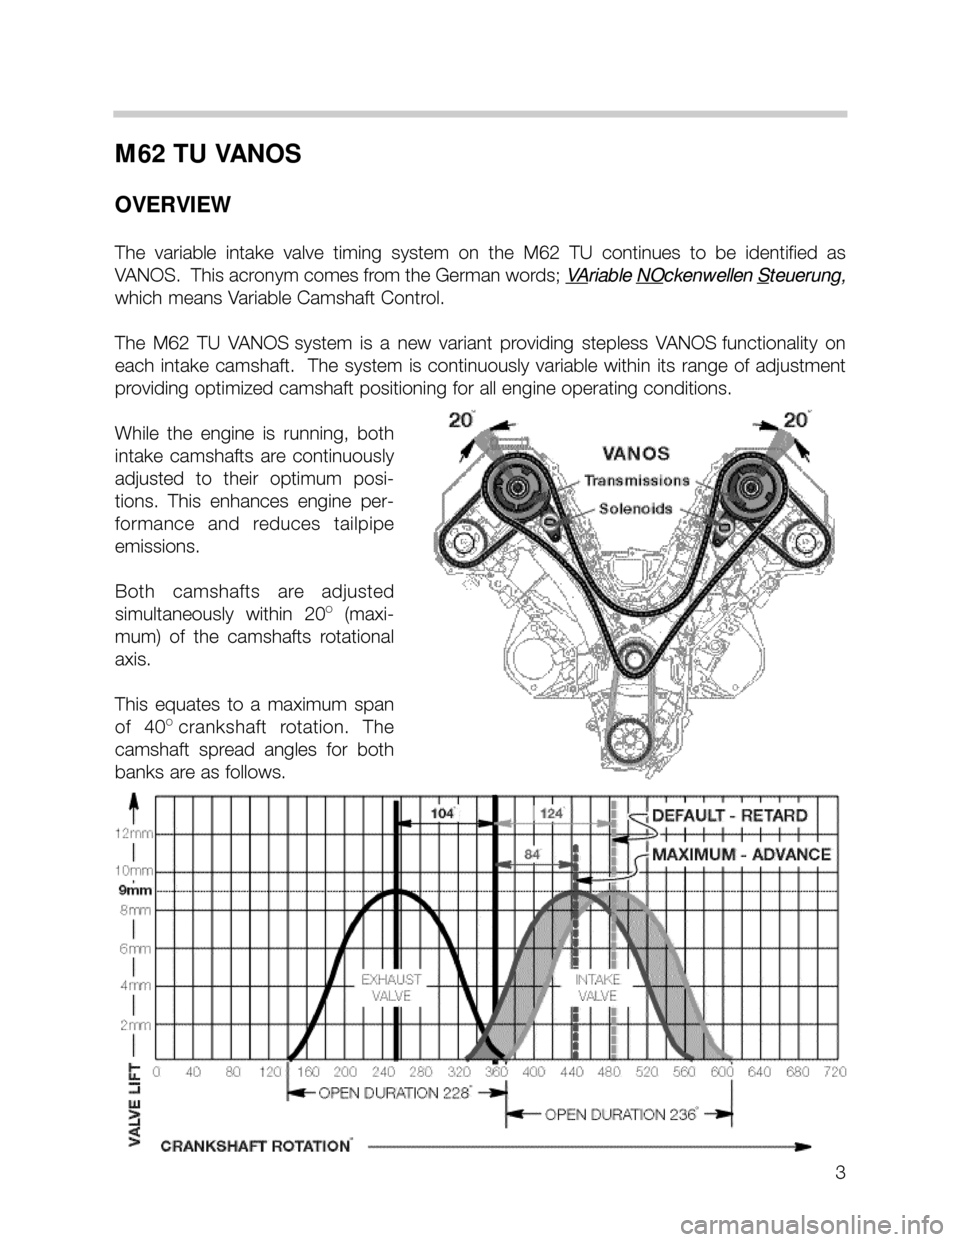 BMW X5 1999 E53 M62TU Engine Workshop Manual 3
M62 TU VANOS
OVERVIEW
The  variable  intake  valve  timing  system  on  the  M62  TU  continues  to  be  identified  as
VANOS.  This acronym comes from the German words; V
Ariable NOckenwellen Steue